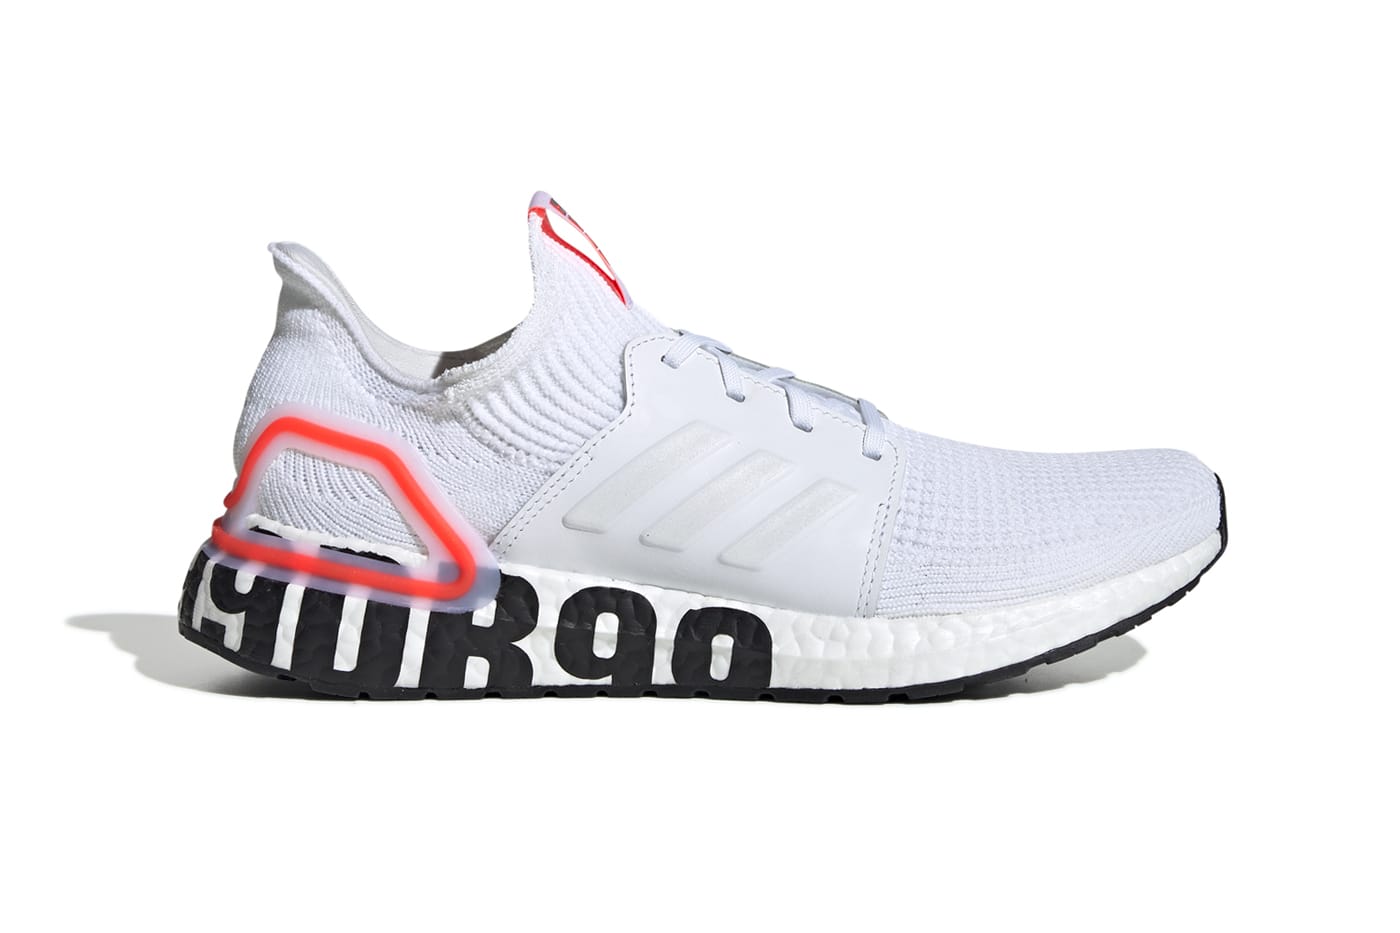 adidas ultra boost upcoming releases